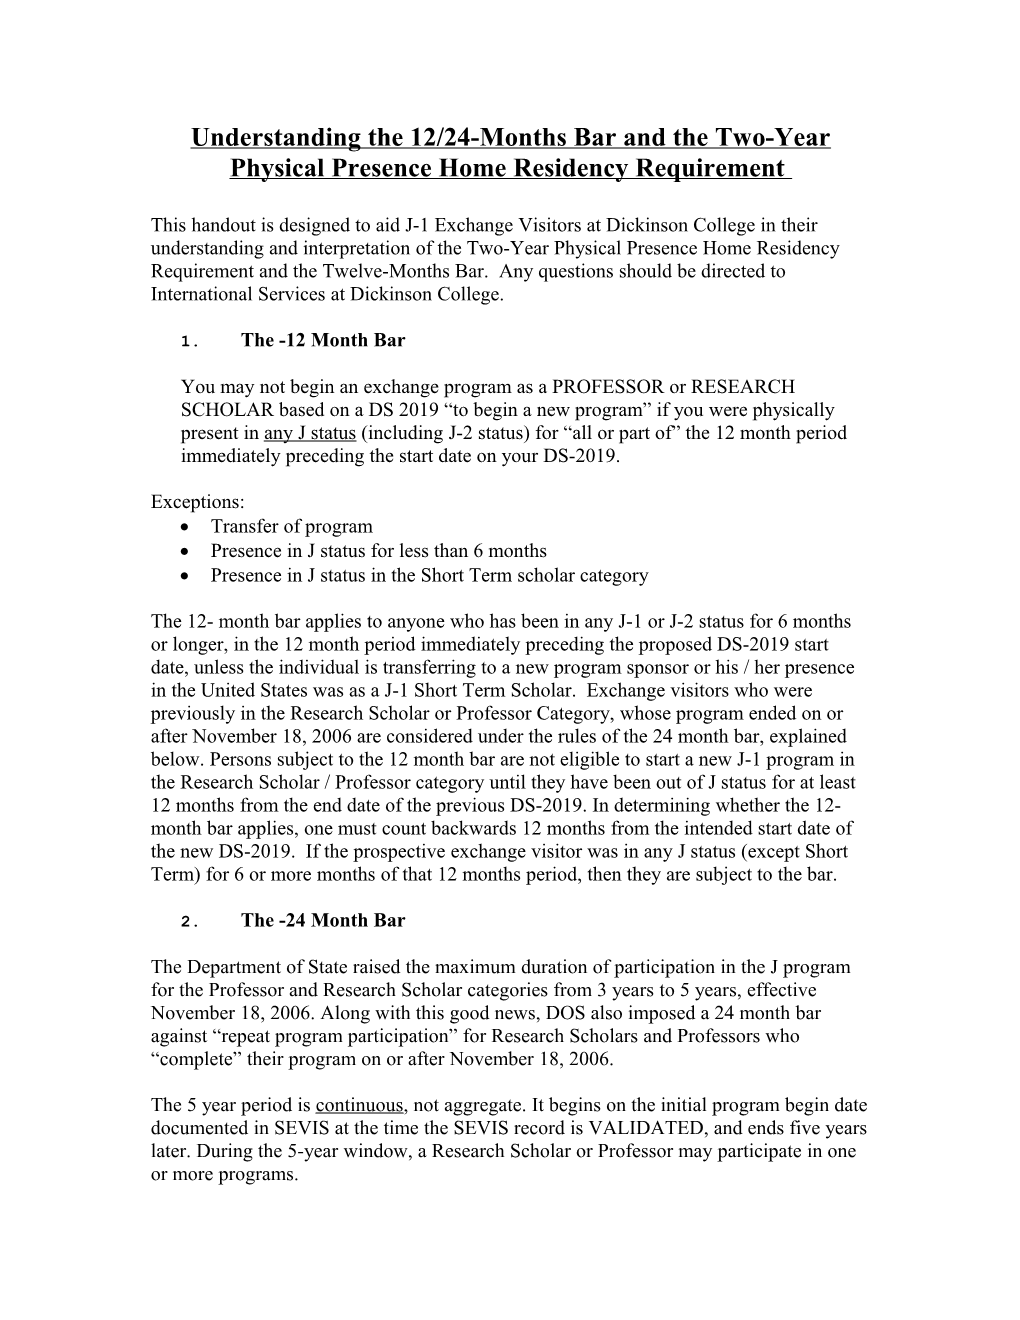 Understanding the Two-Year Physical Presence Home Residency Requirement and the Twelve-Months